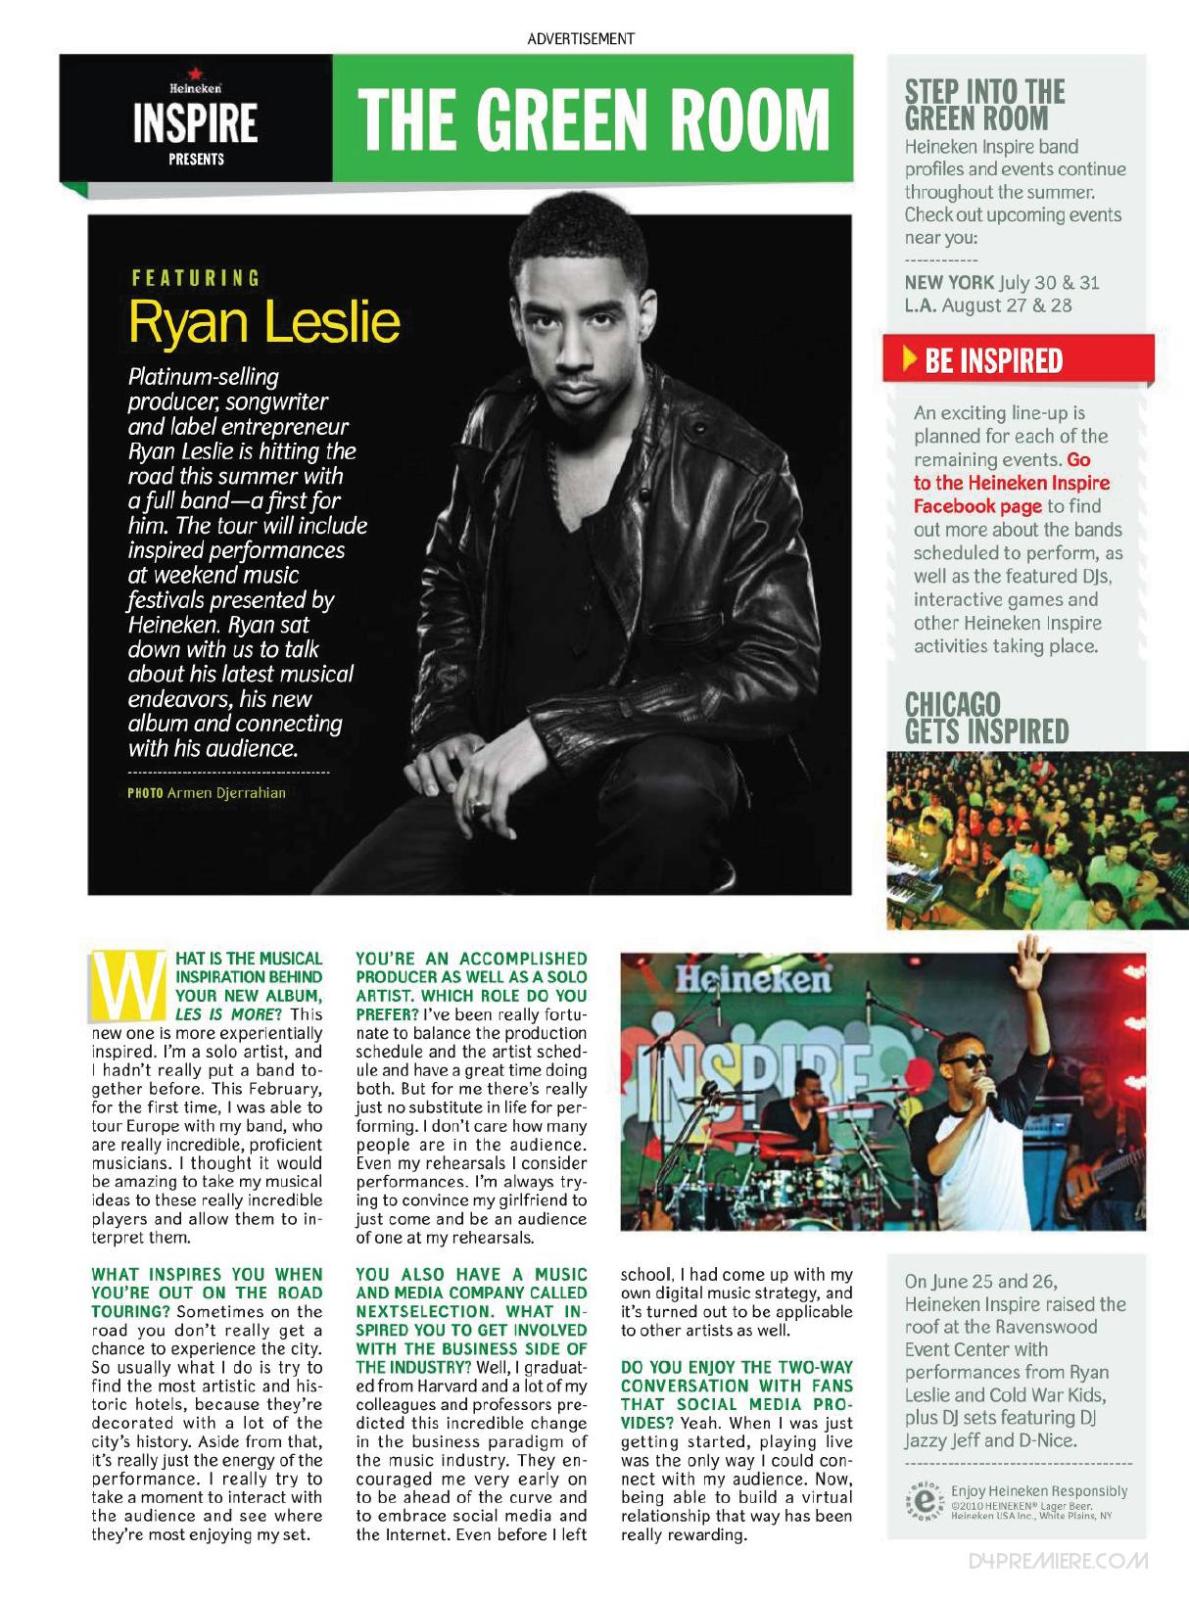 Ryan Leslie Feature In RollingStone Magazine | HipHop-N-More1189 x 1599